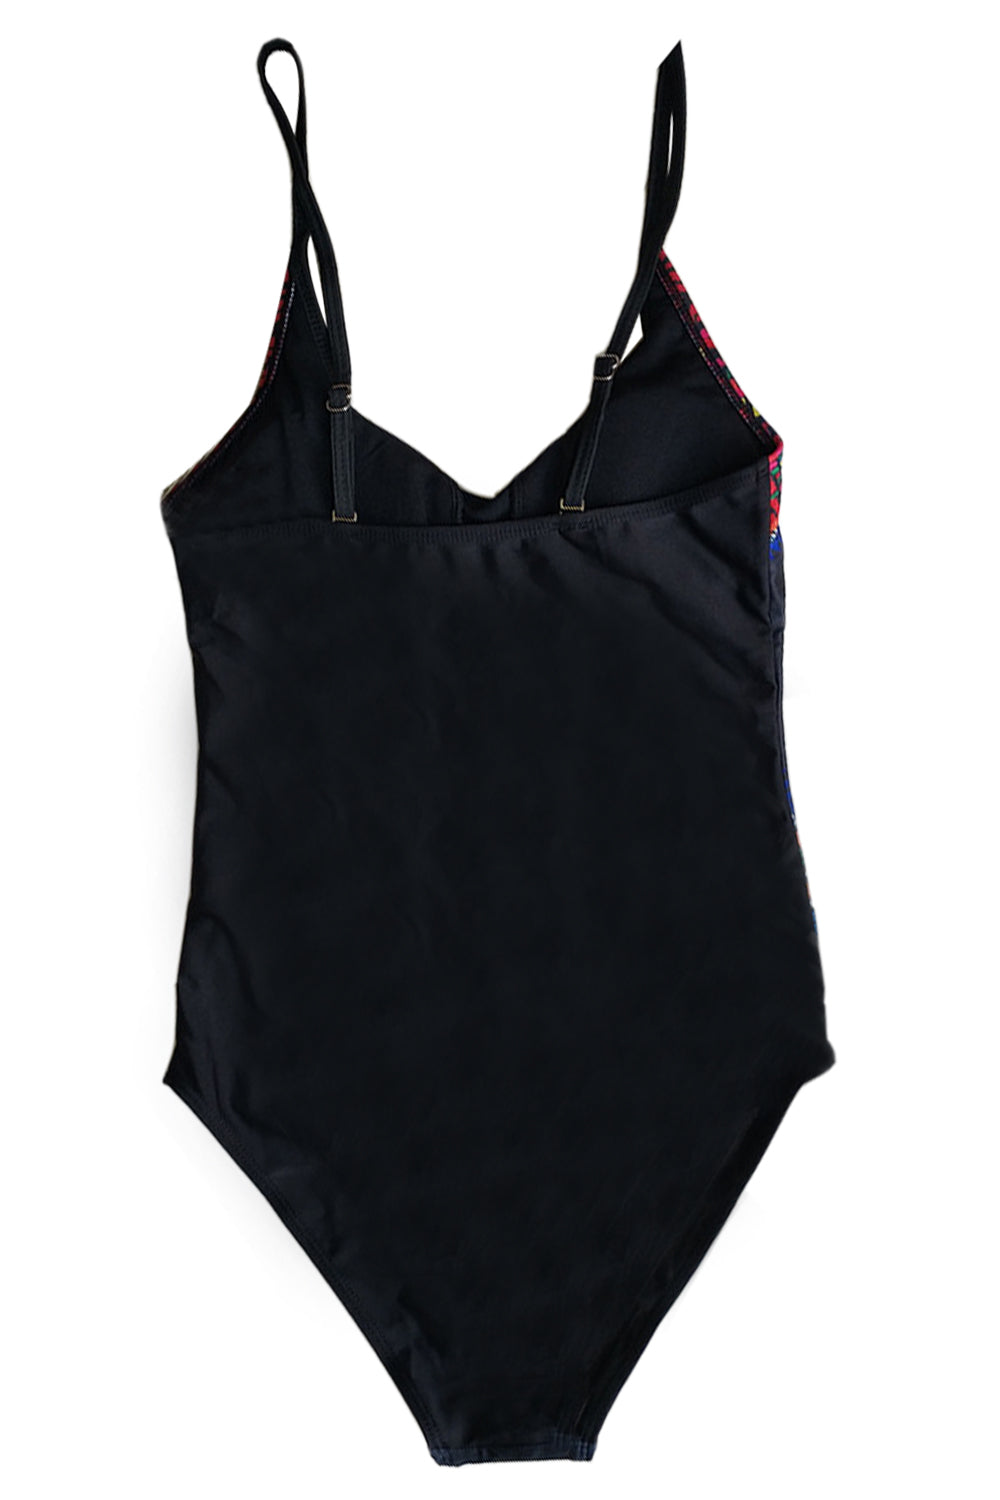 Iyasson Black Lace Up Mesh Splicing One-piece Swimsuit